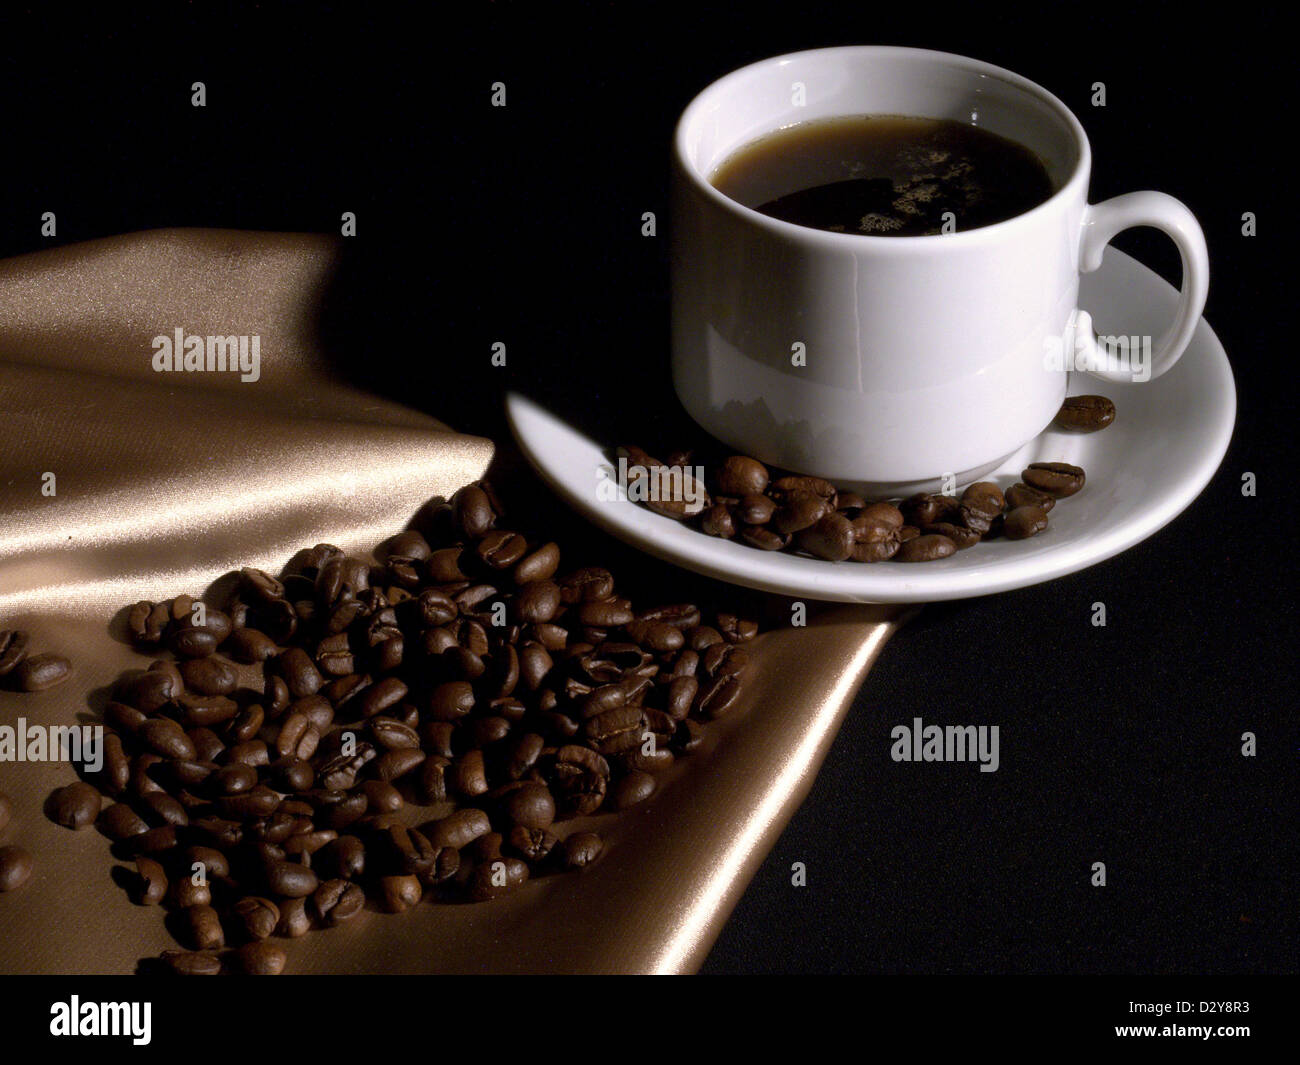 Cup of coffee and coffee beans on the golden fabric Stock Photo